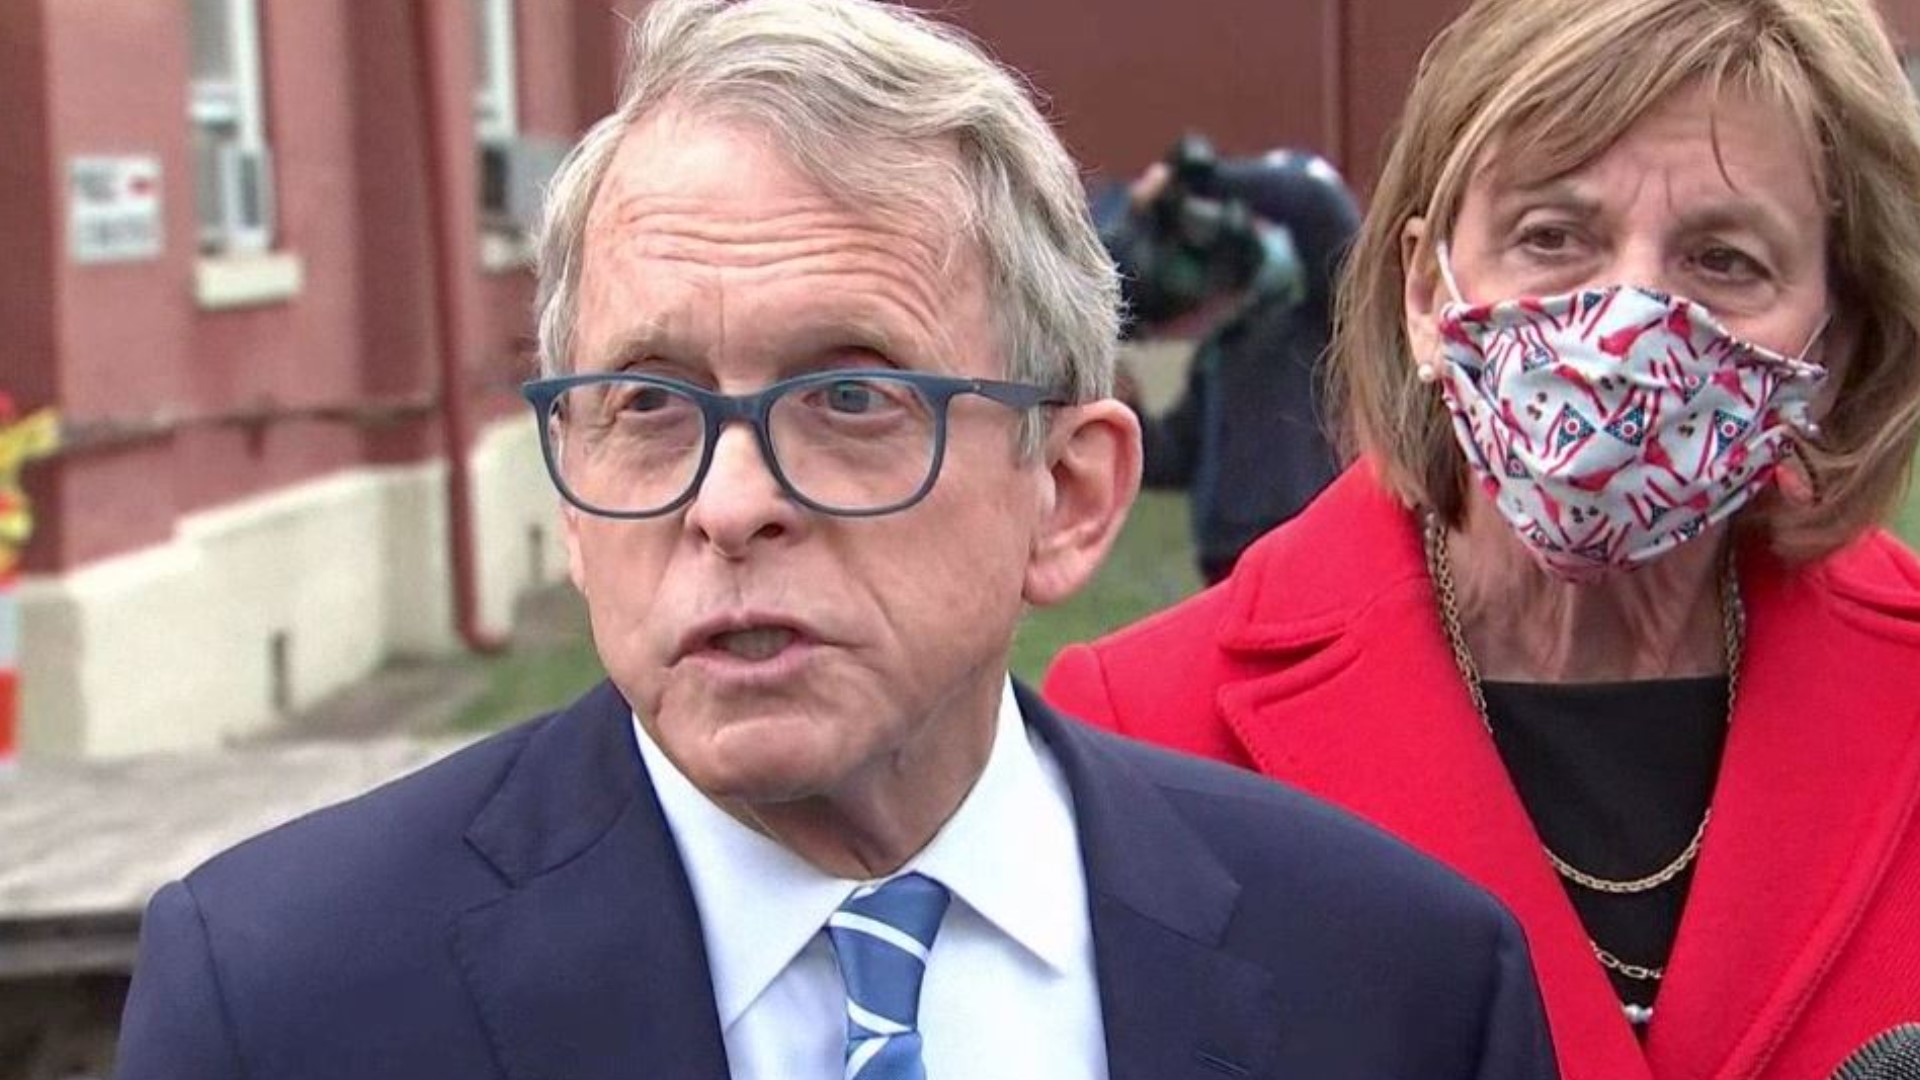 Gov. DeWine spoke in Pike County after Edward "Jake" Wagner pleaded guilty to eight counts of aggravated murder and other charges.